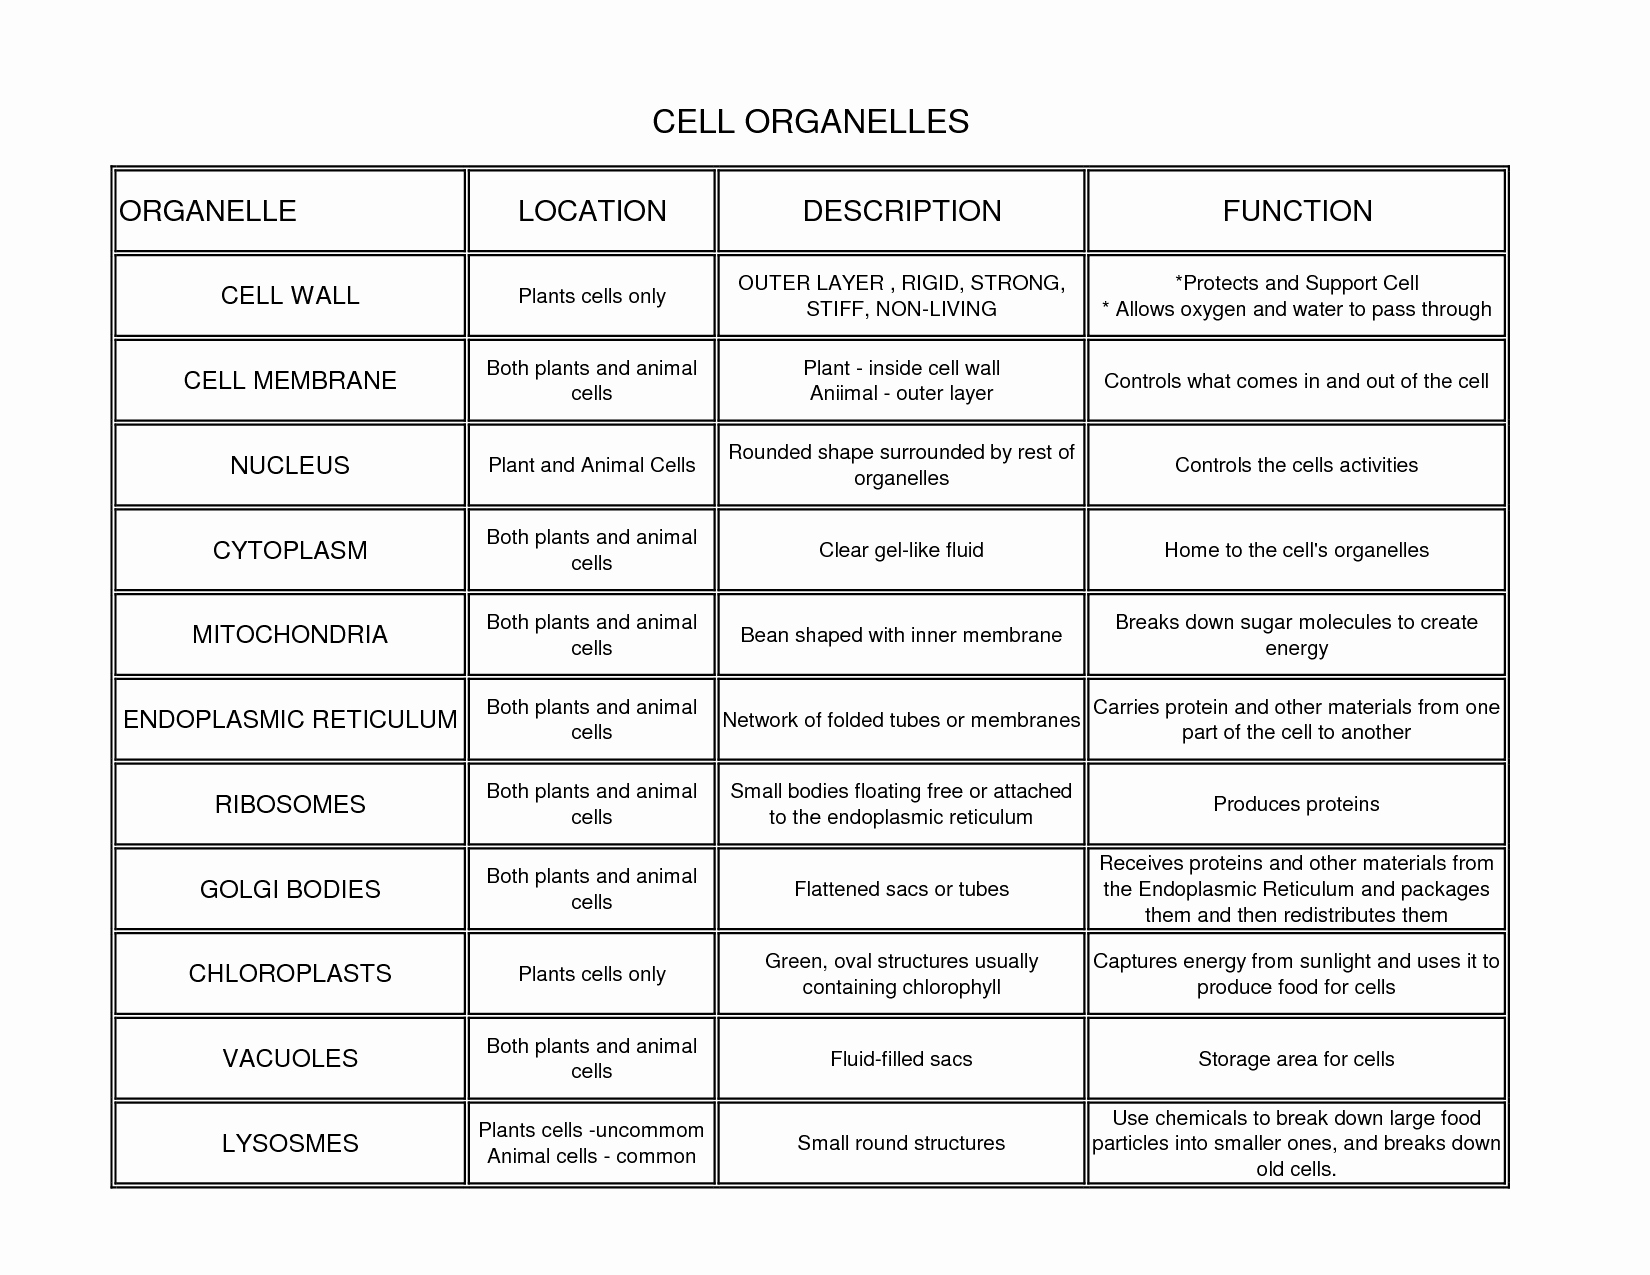 Function Of the organelles Worksheet Inspirational Biology 1 2 Final Exam Cheat Sheet by El Go650